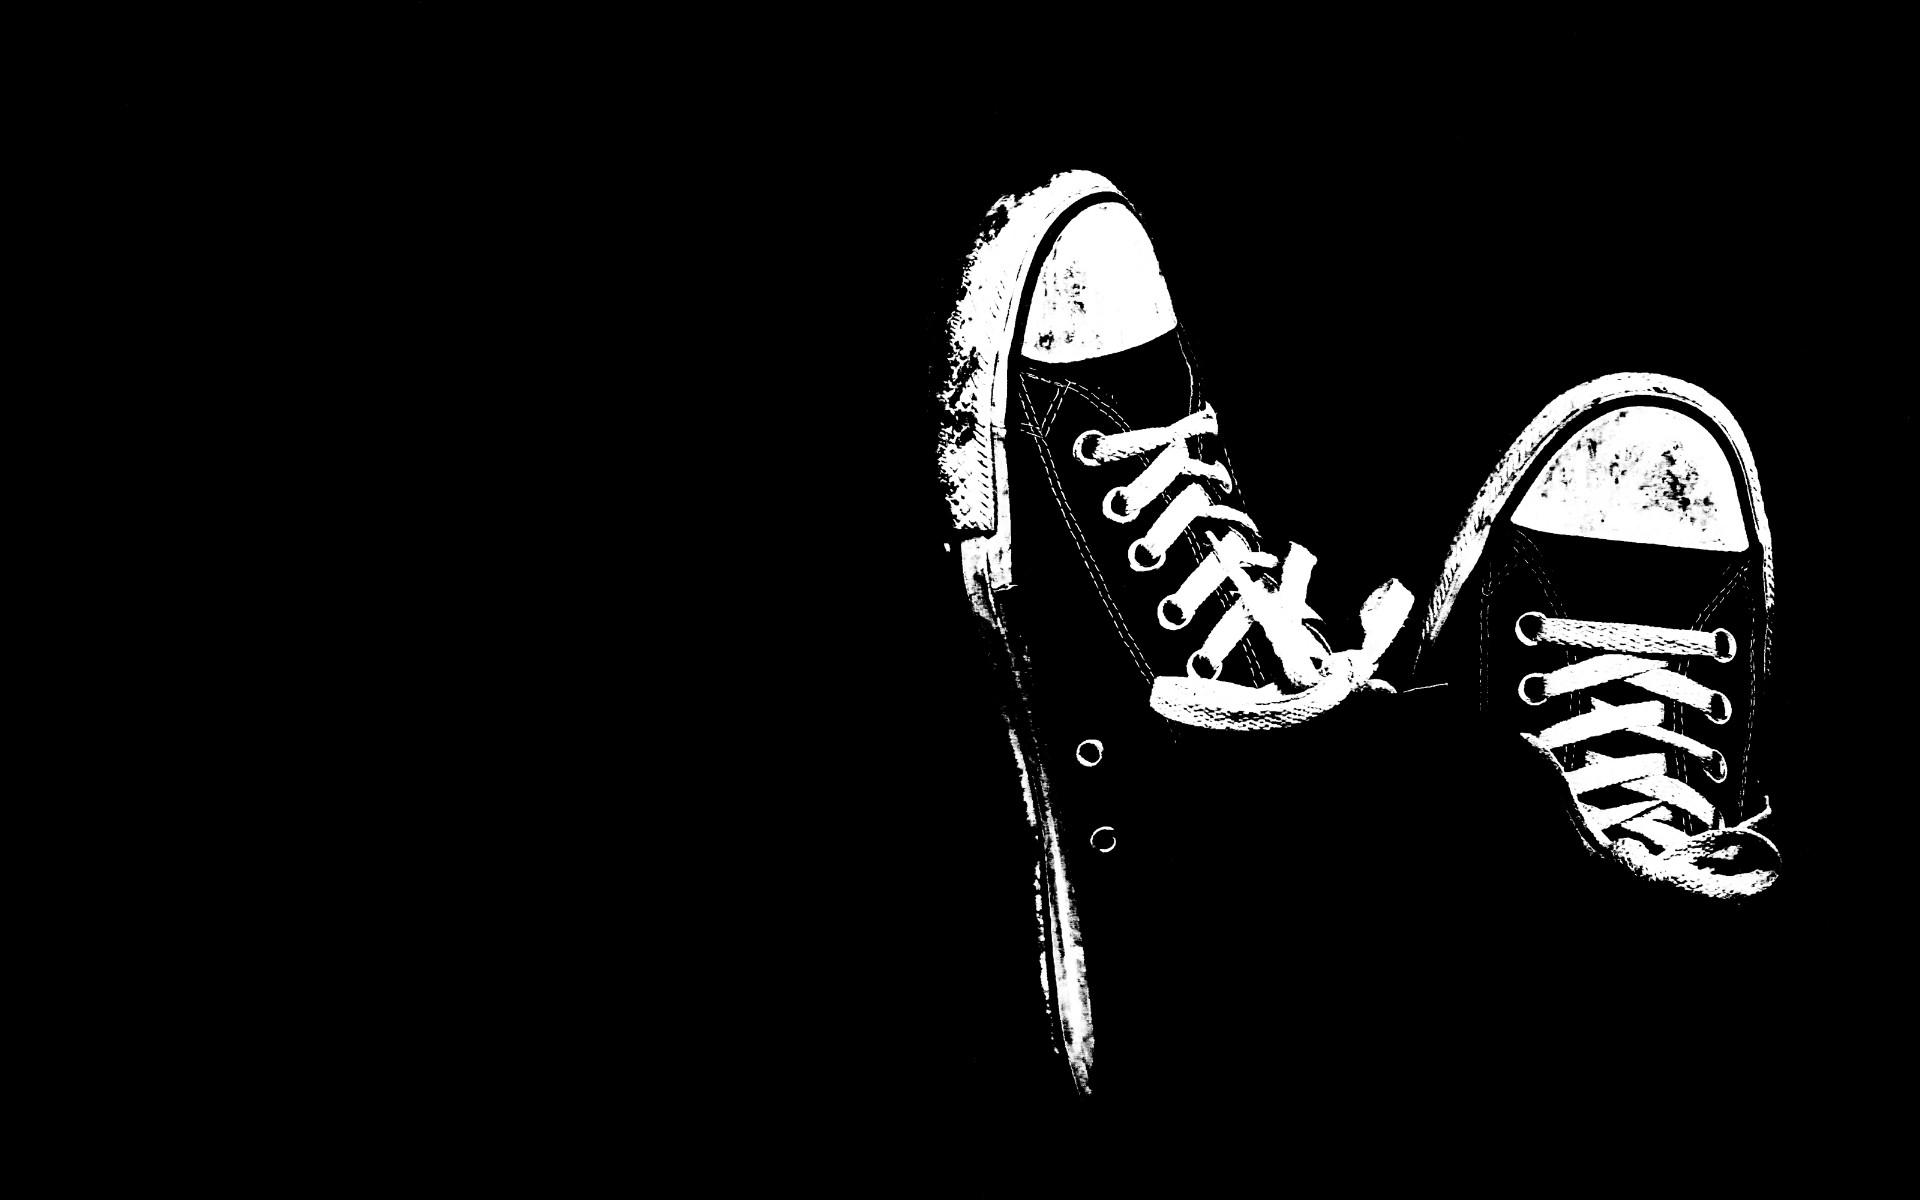 HD wallpaper, Shoes, Black And White, Sneakers, Black Background, Minimalism